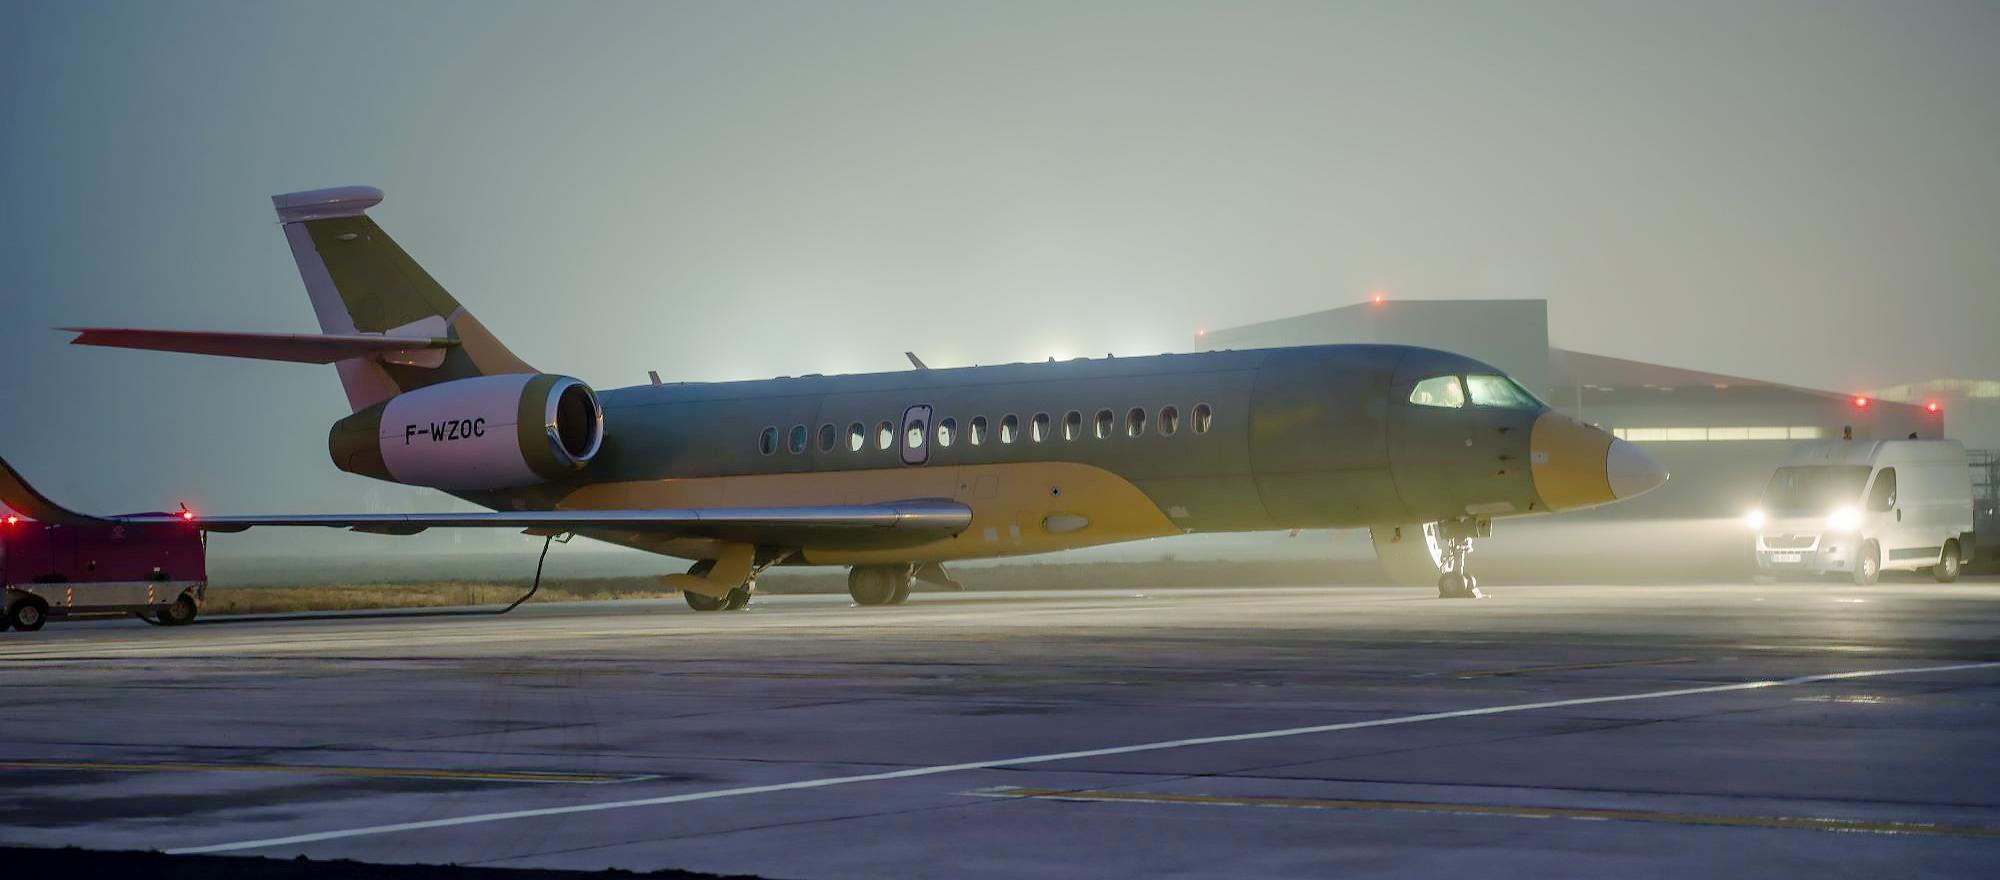 Dassault Falcon 6X Serial Number 5 taxis for departure from France’s Bordeaux-Mérignac Airport (Photo: Dassault FalconJet)